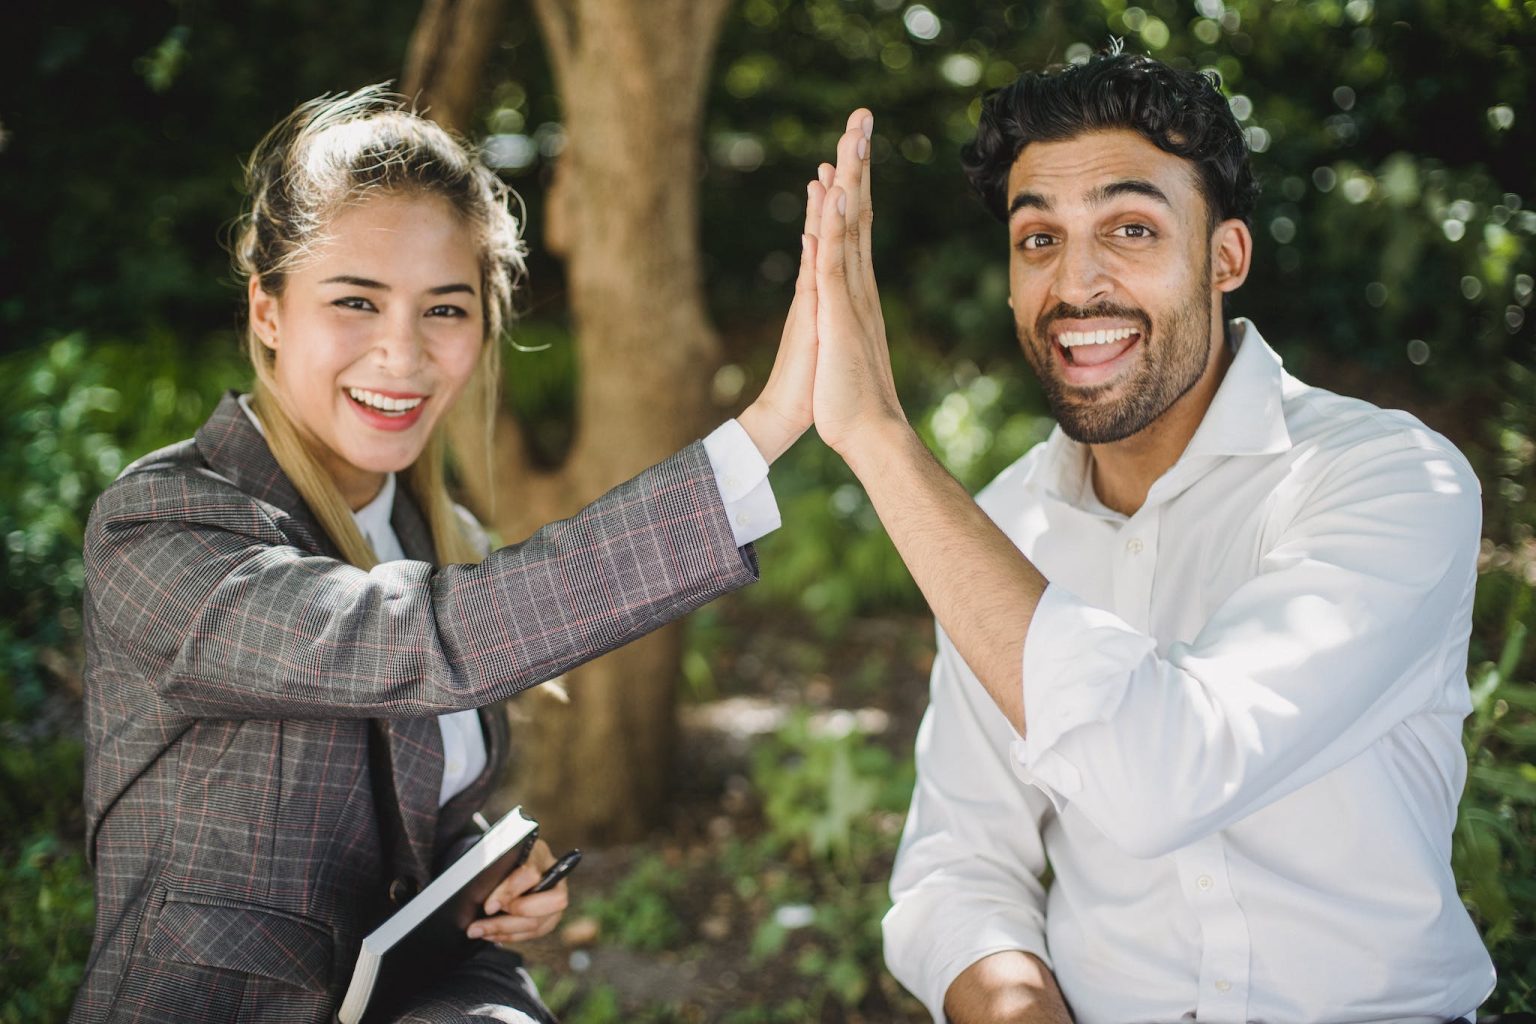 Business People High Five Outdoors 